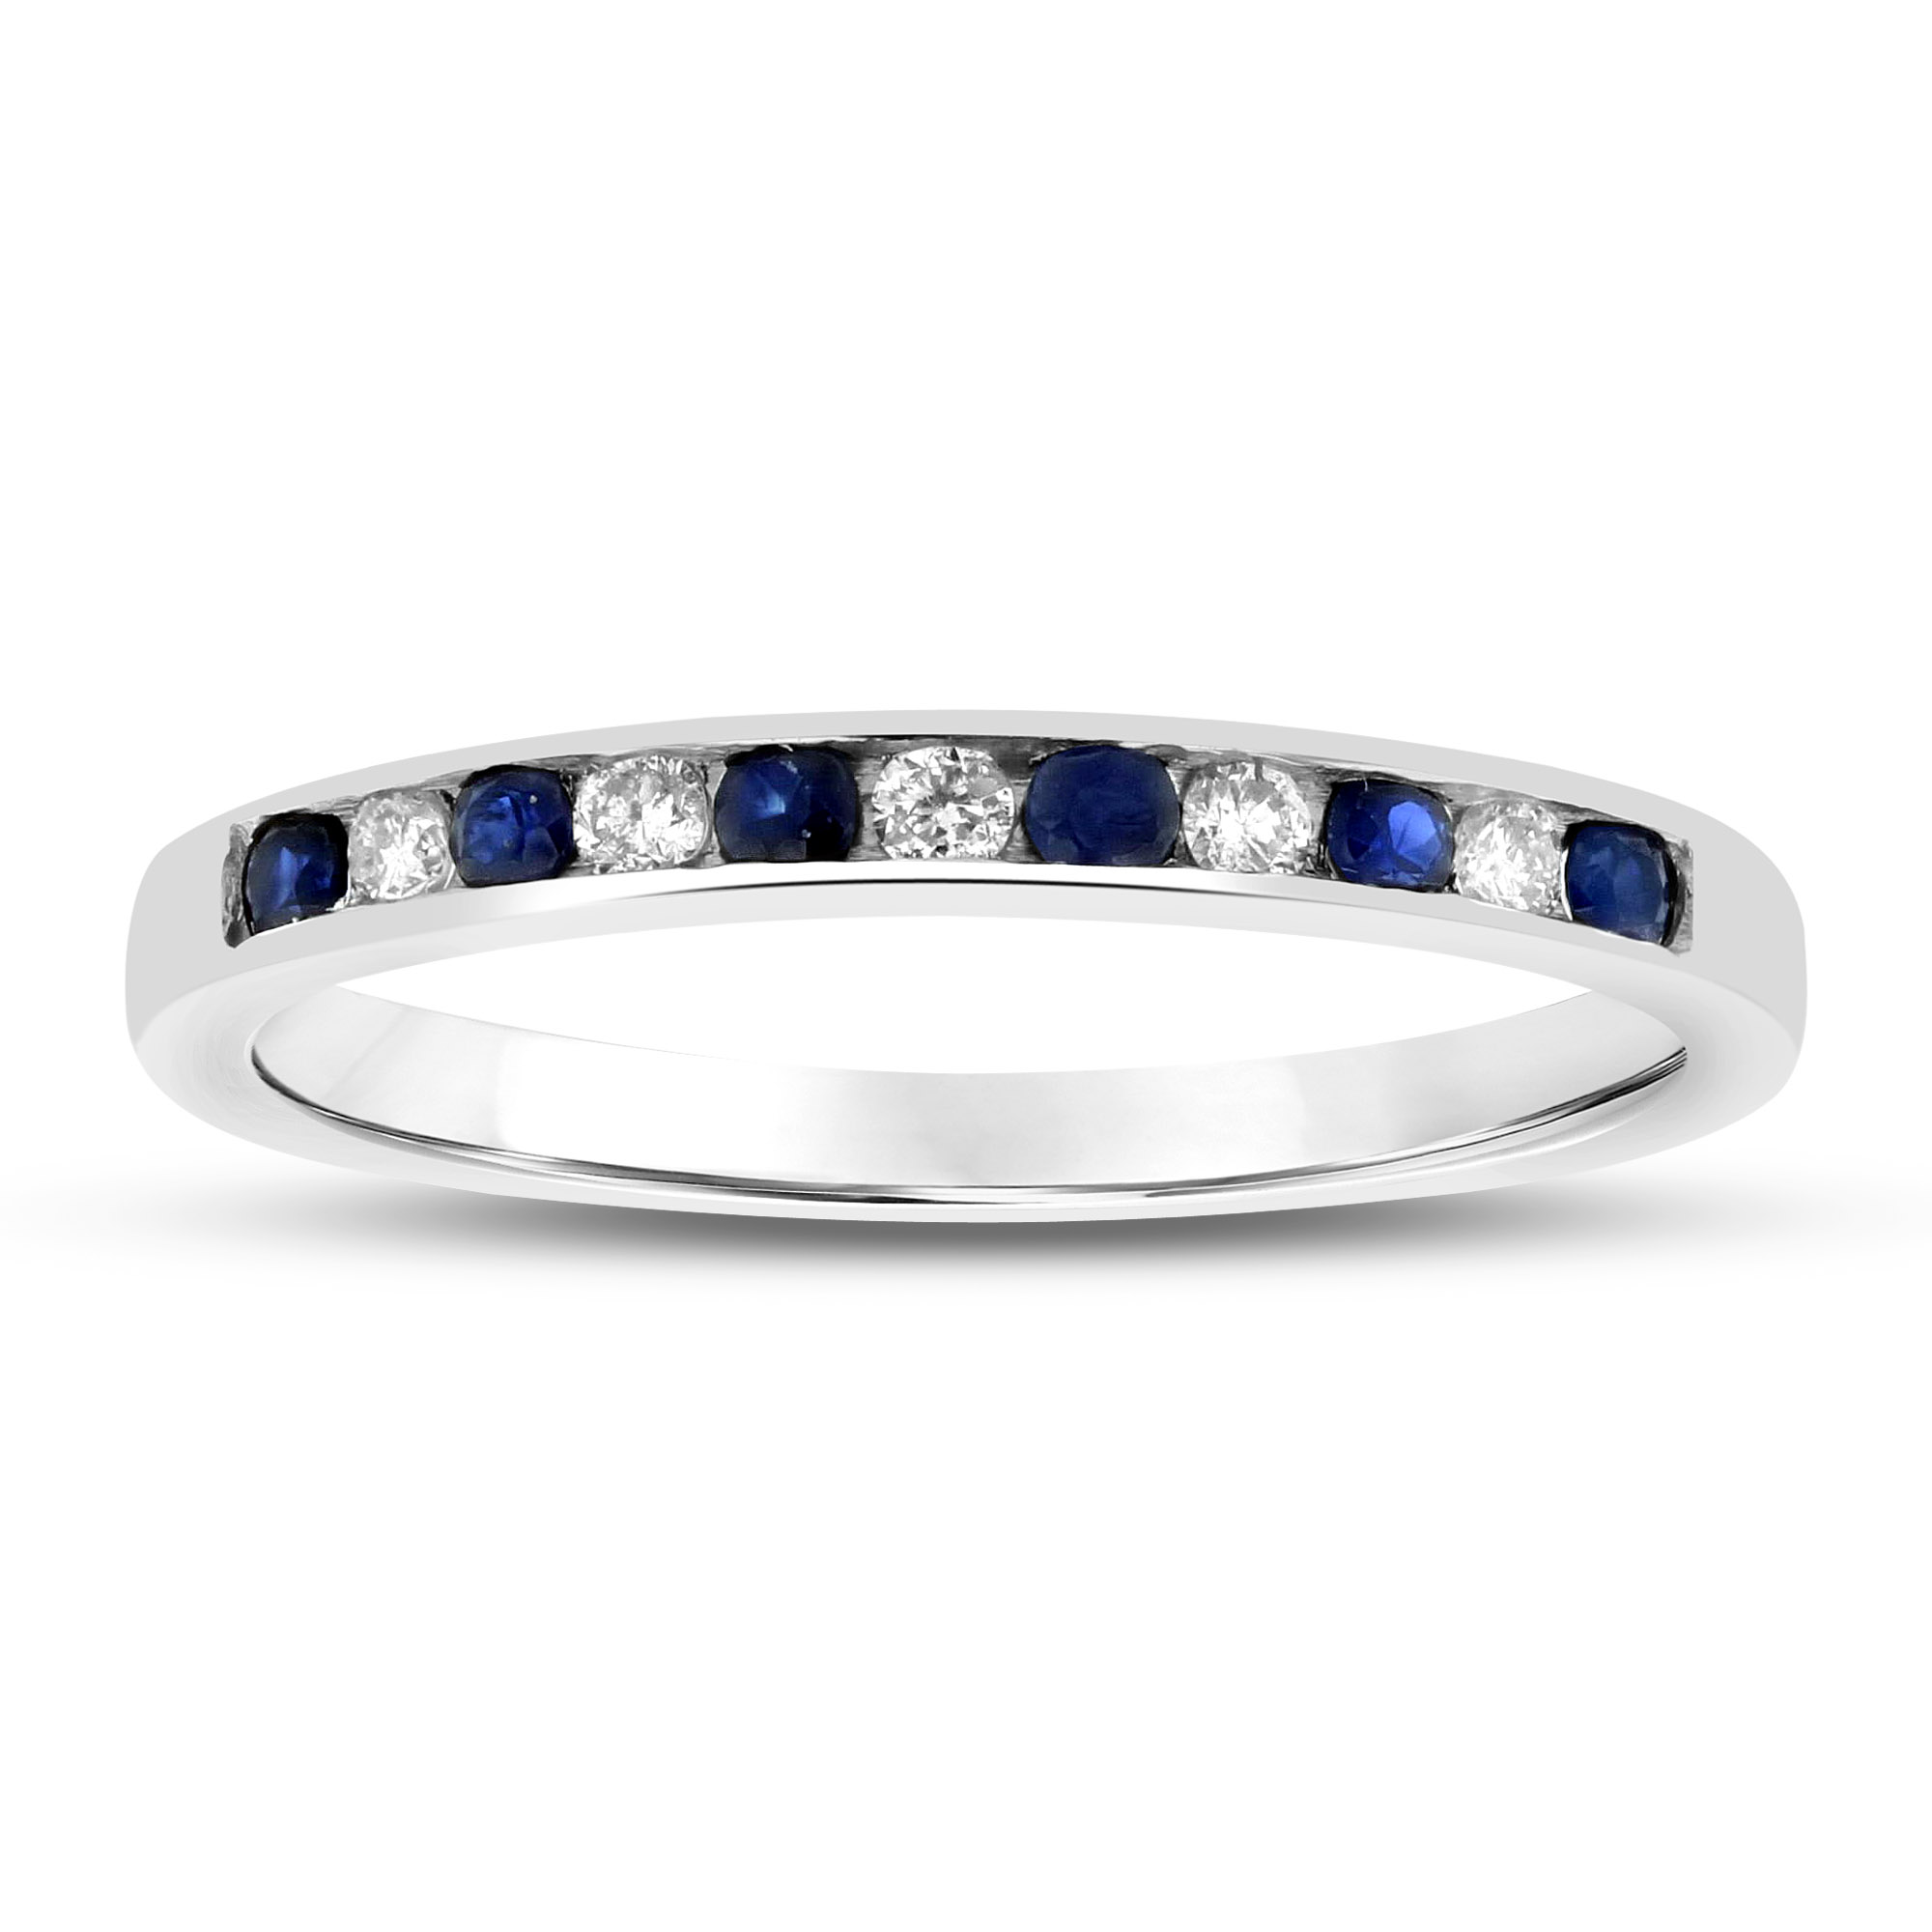 0.27ctw Diamond and Sapphire Band in 14k Gold